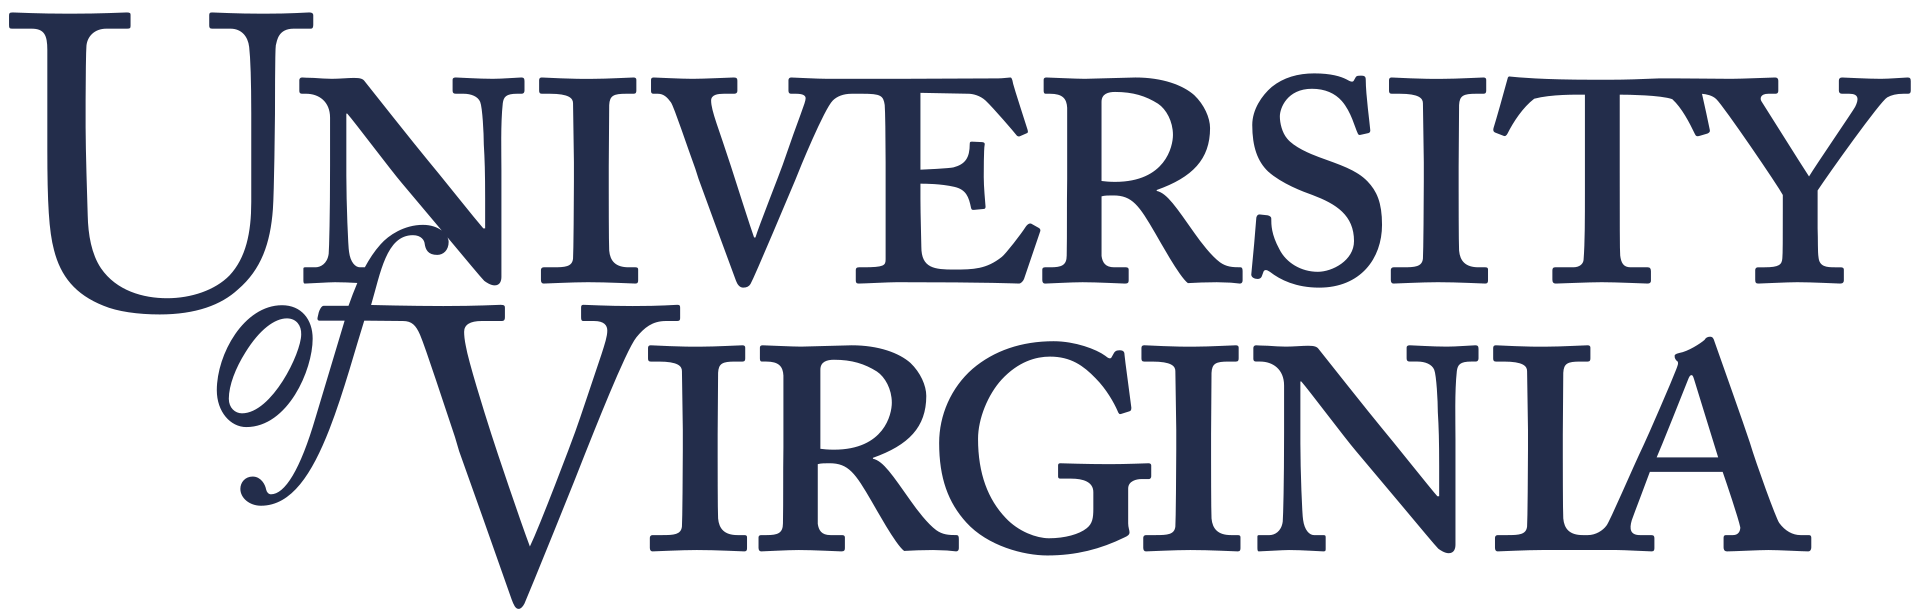 University of Virginia logo, By University of Virginia - Can be obtained from U.Va., Public Domain, http://commons.wikimedia.org/w/index.php?curid=18657033"